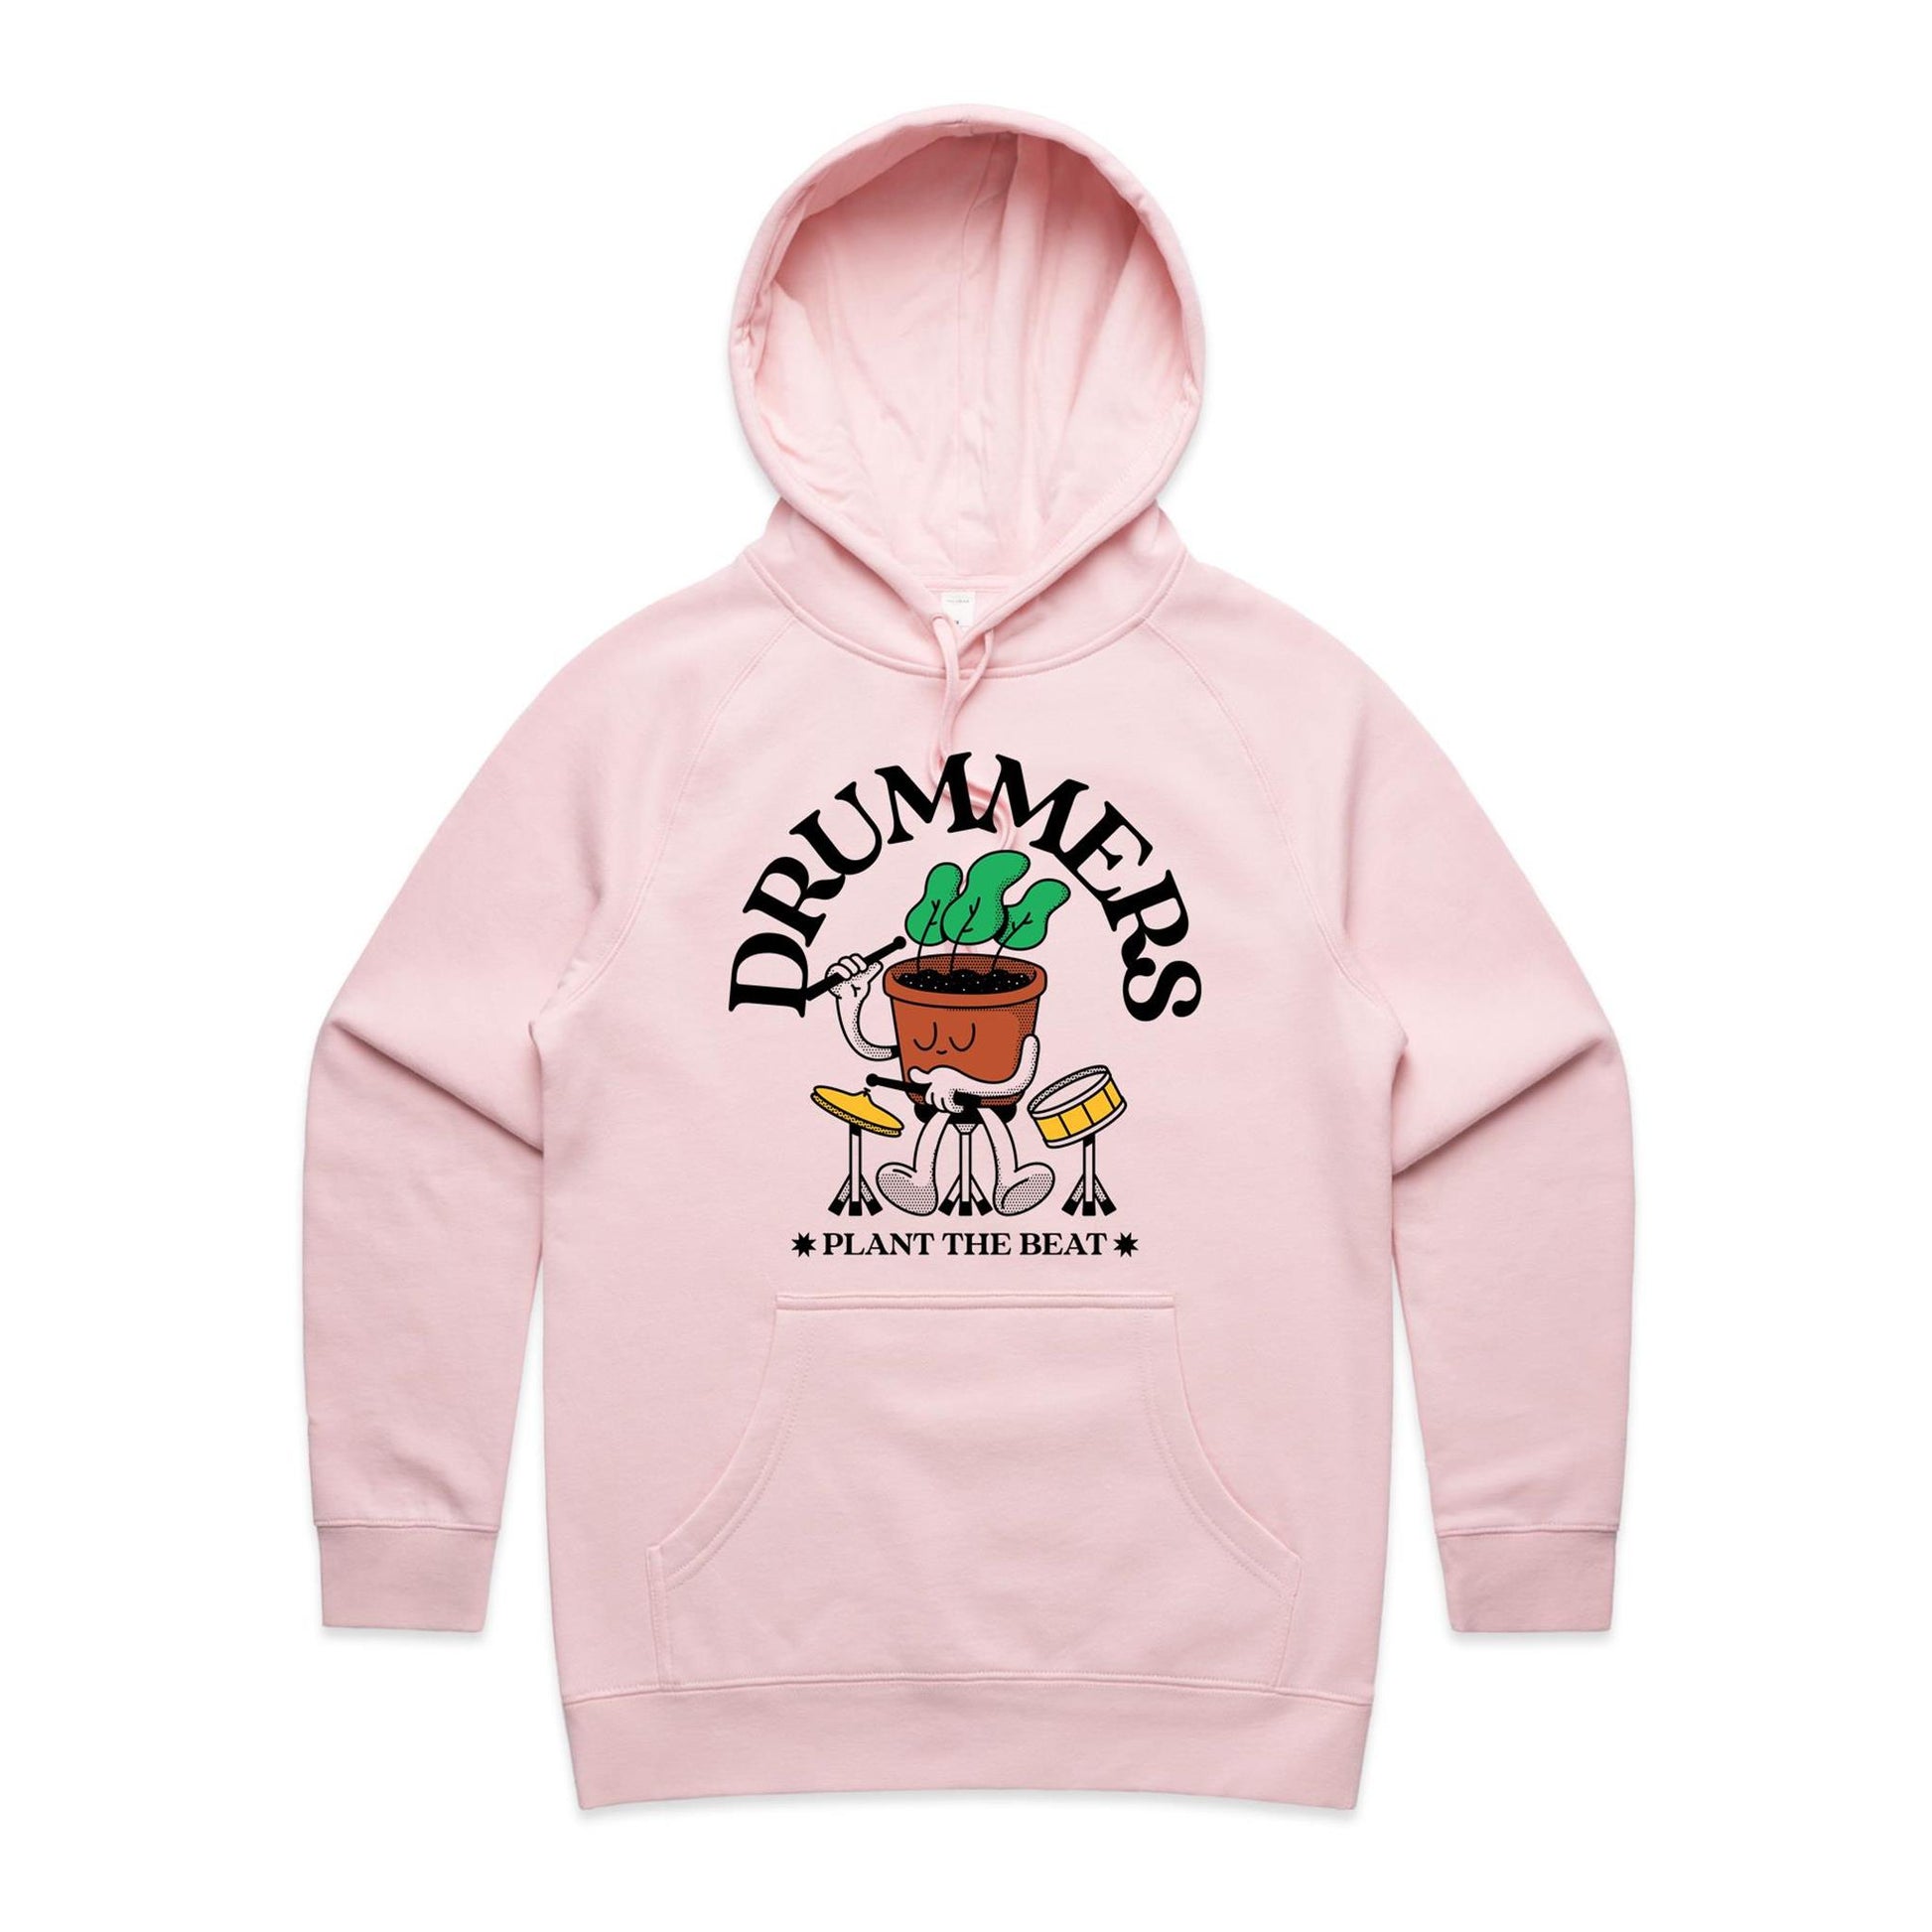 Drummers Plant The Beat - Women's Supply Hood Pink Womens Supply Hoodie Music